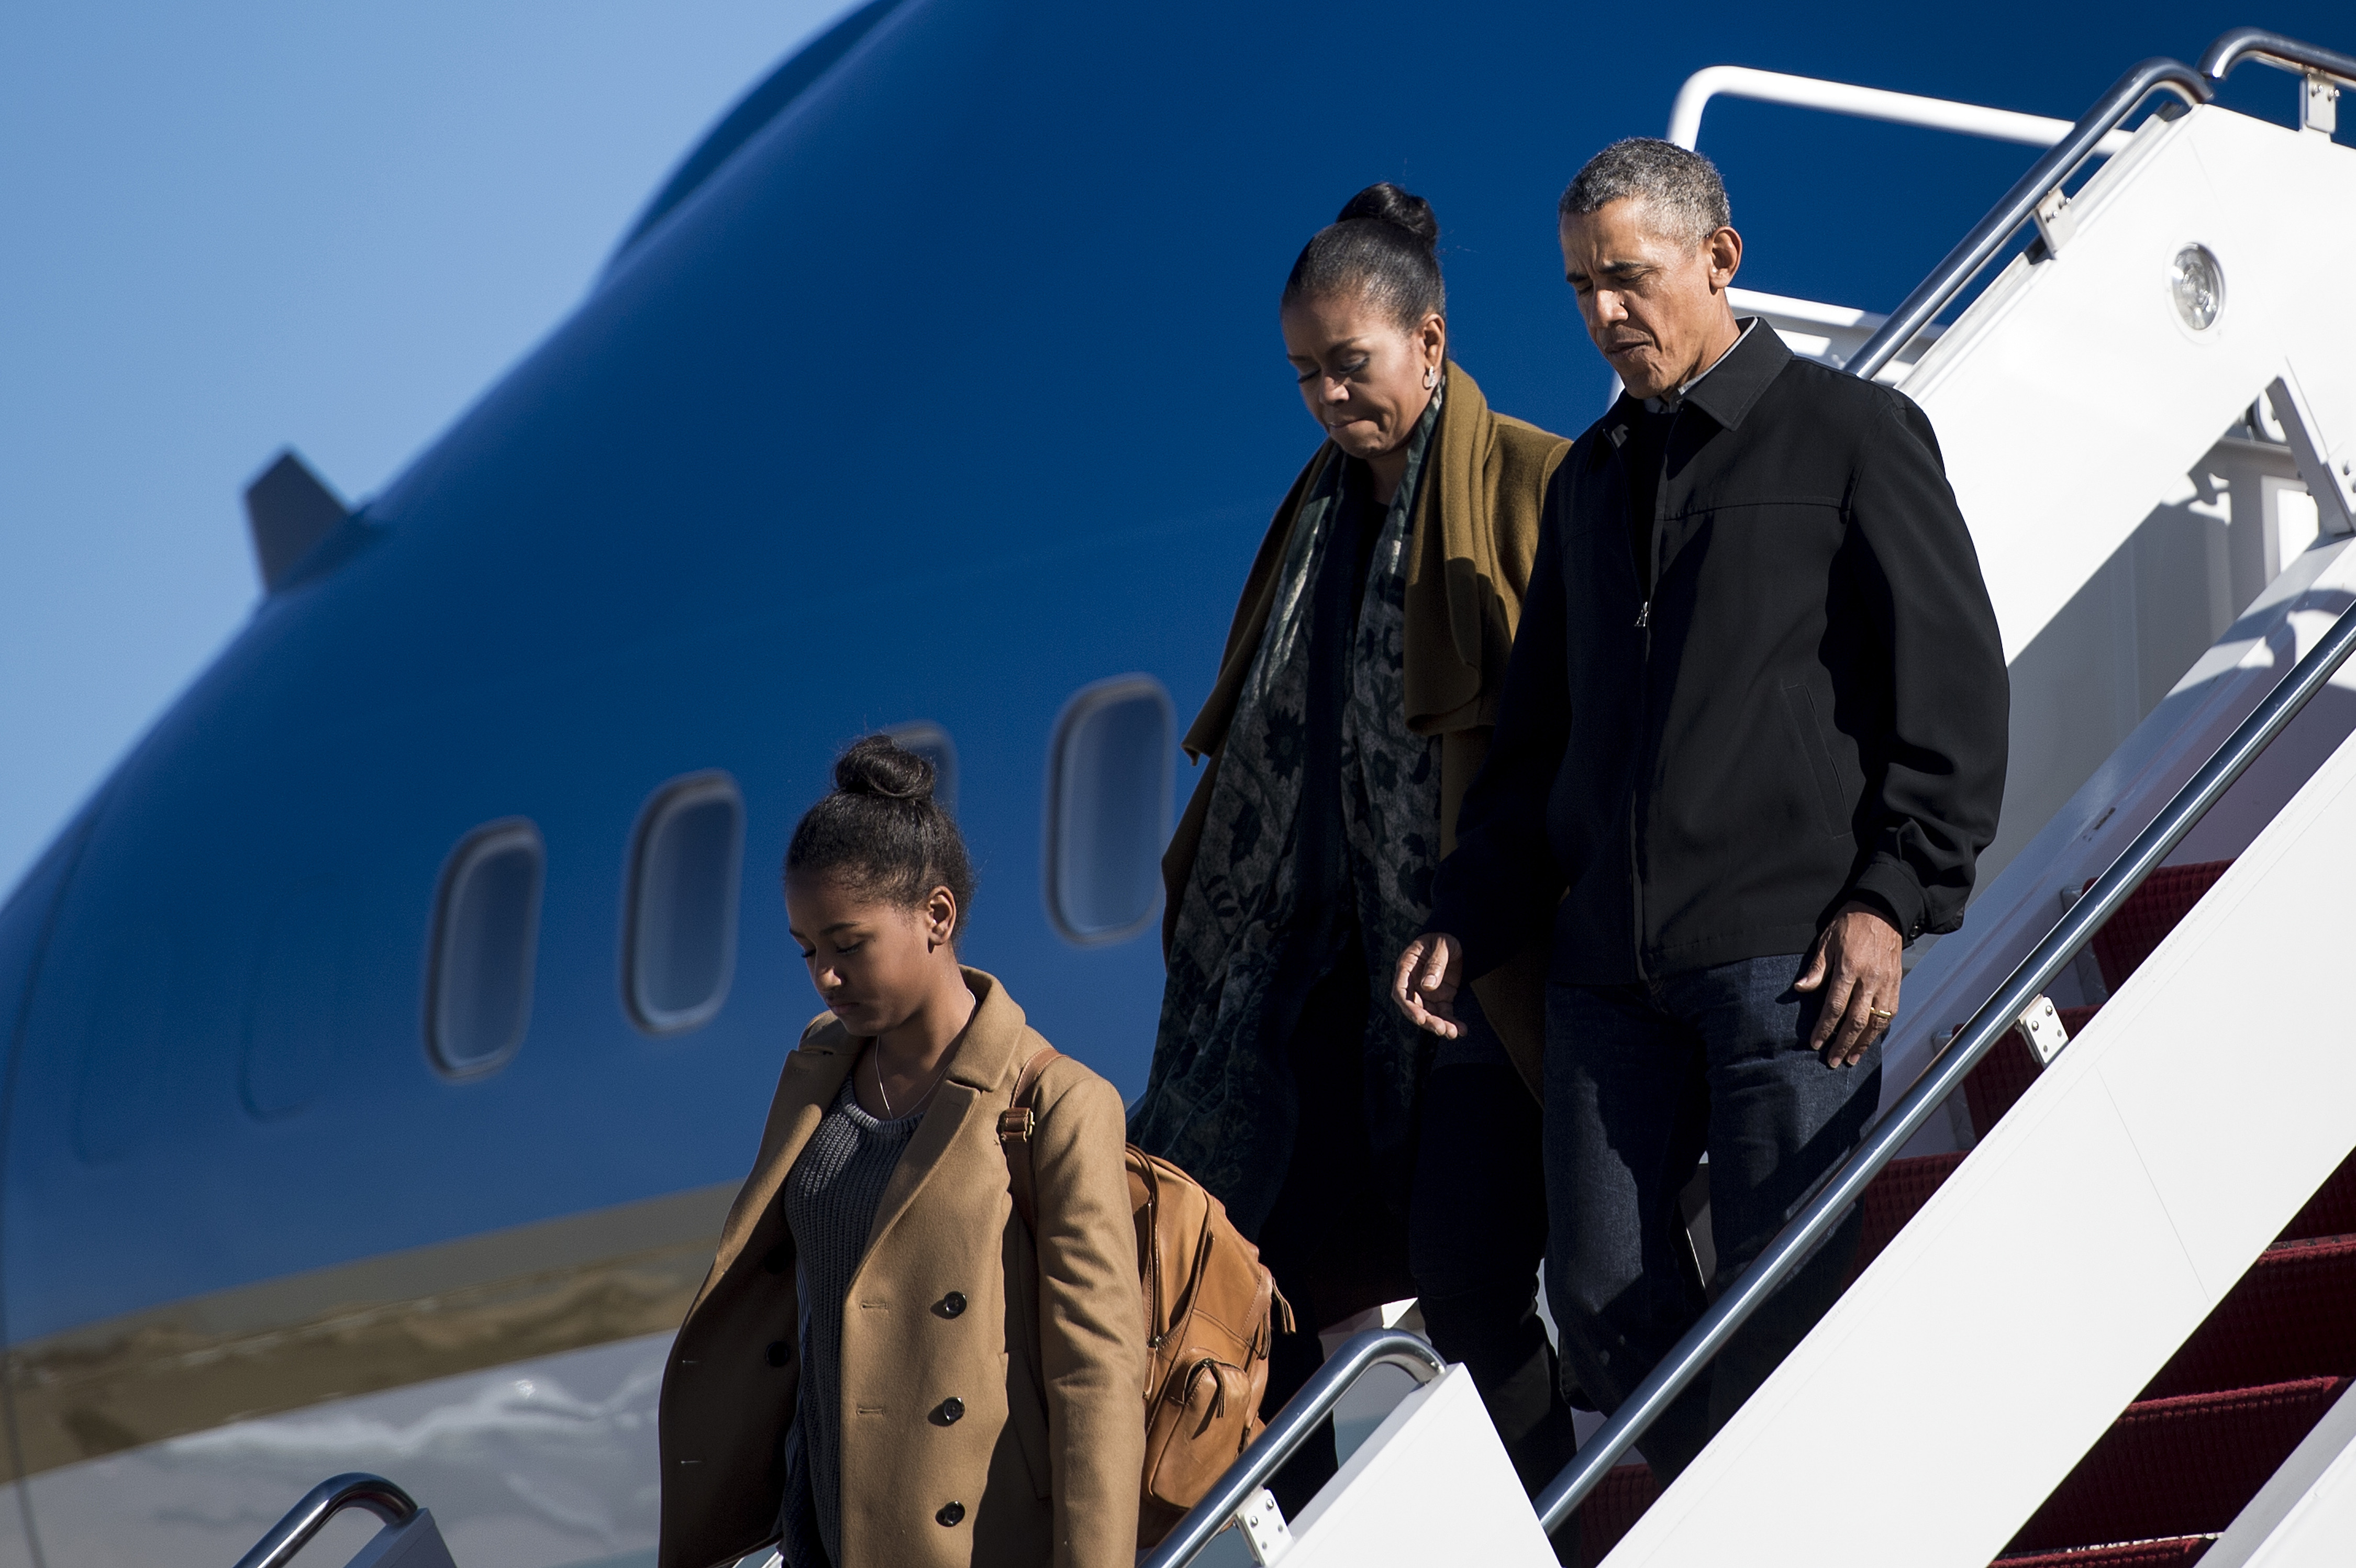 Sasha Obama, Michelle Obama and Barack Obama arrive at Andrews Air Force Base on January 3, 2016 in Maryland. | Source: Getty Images